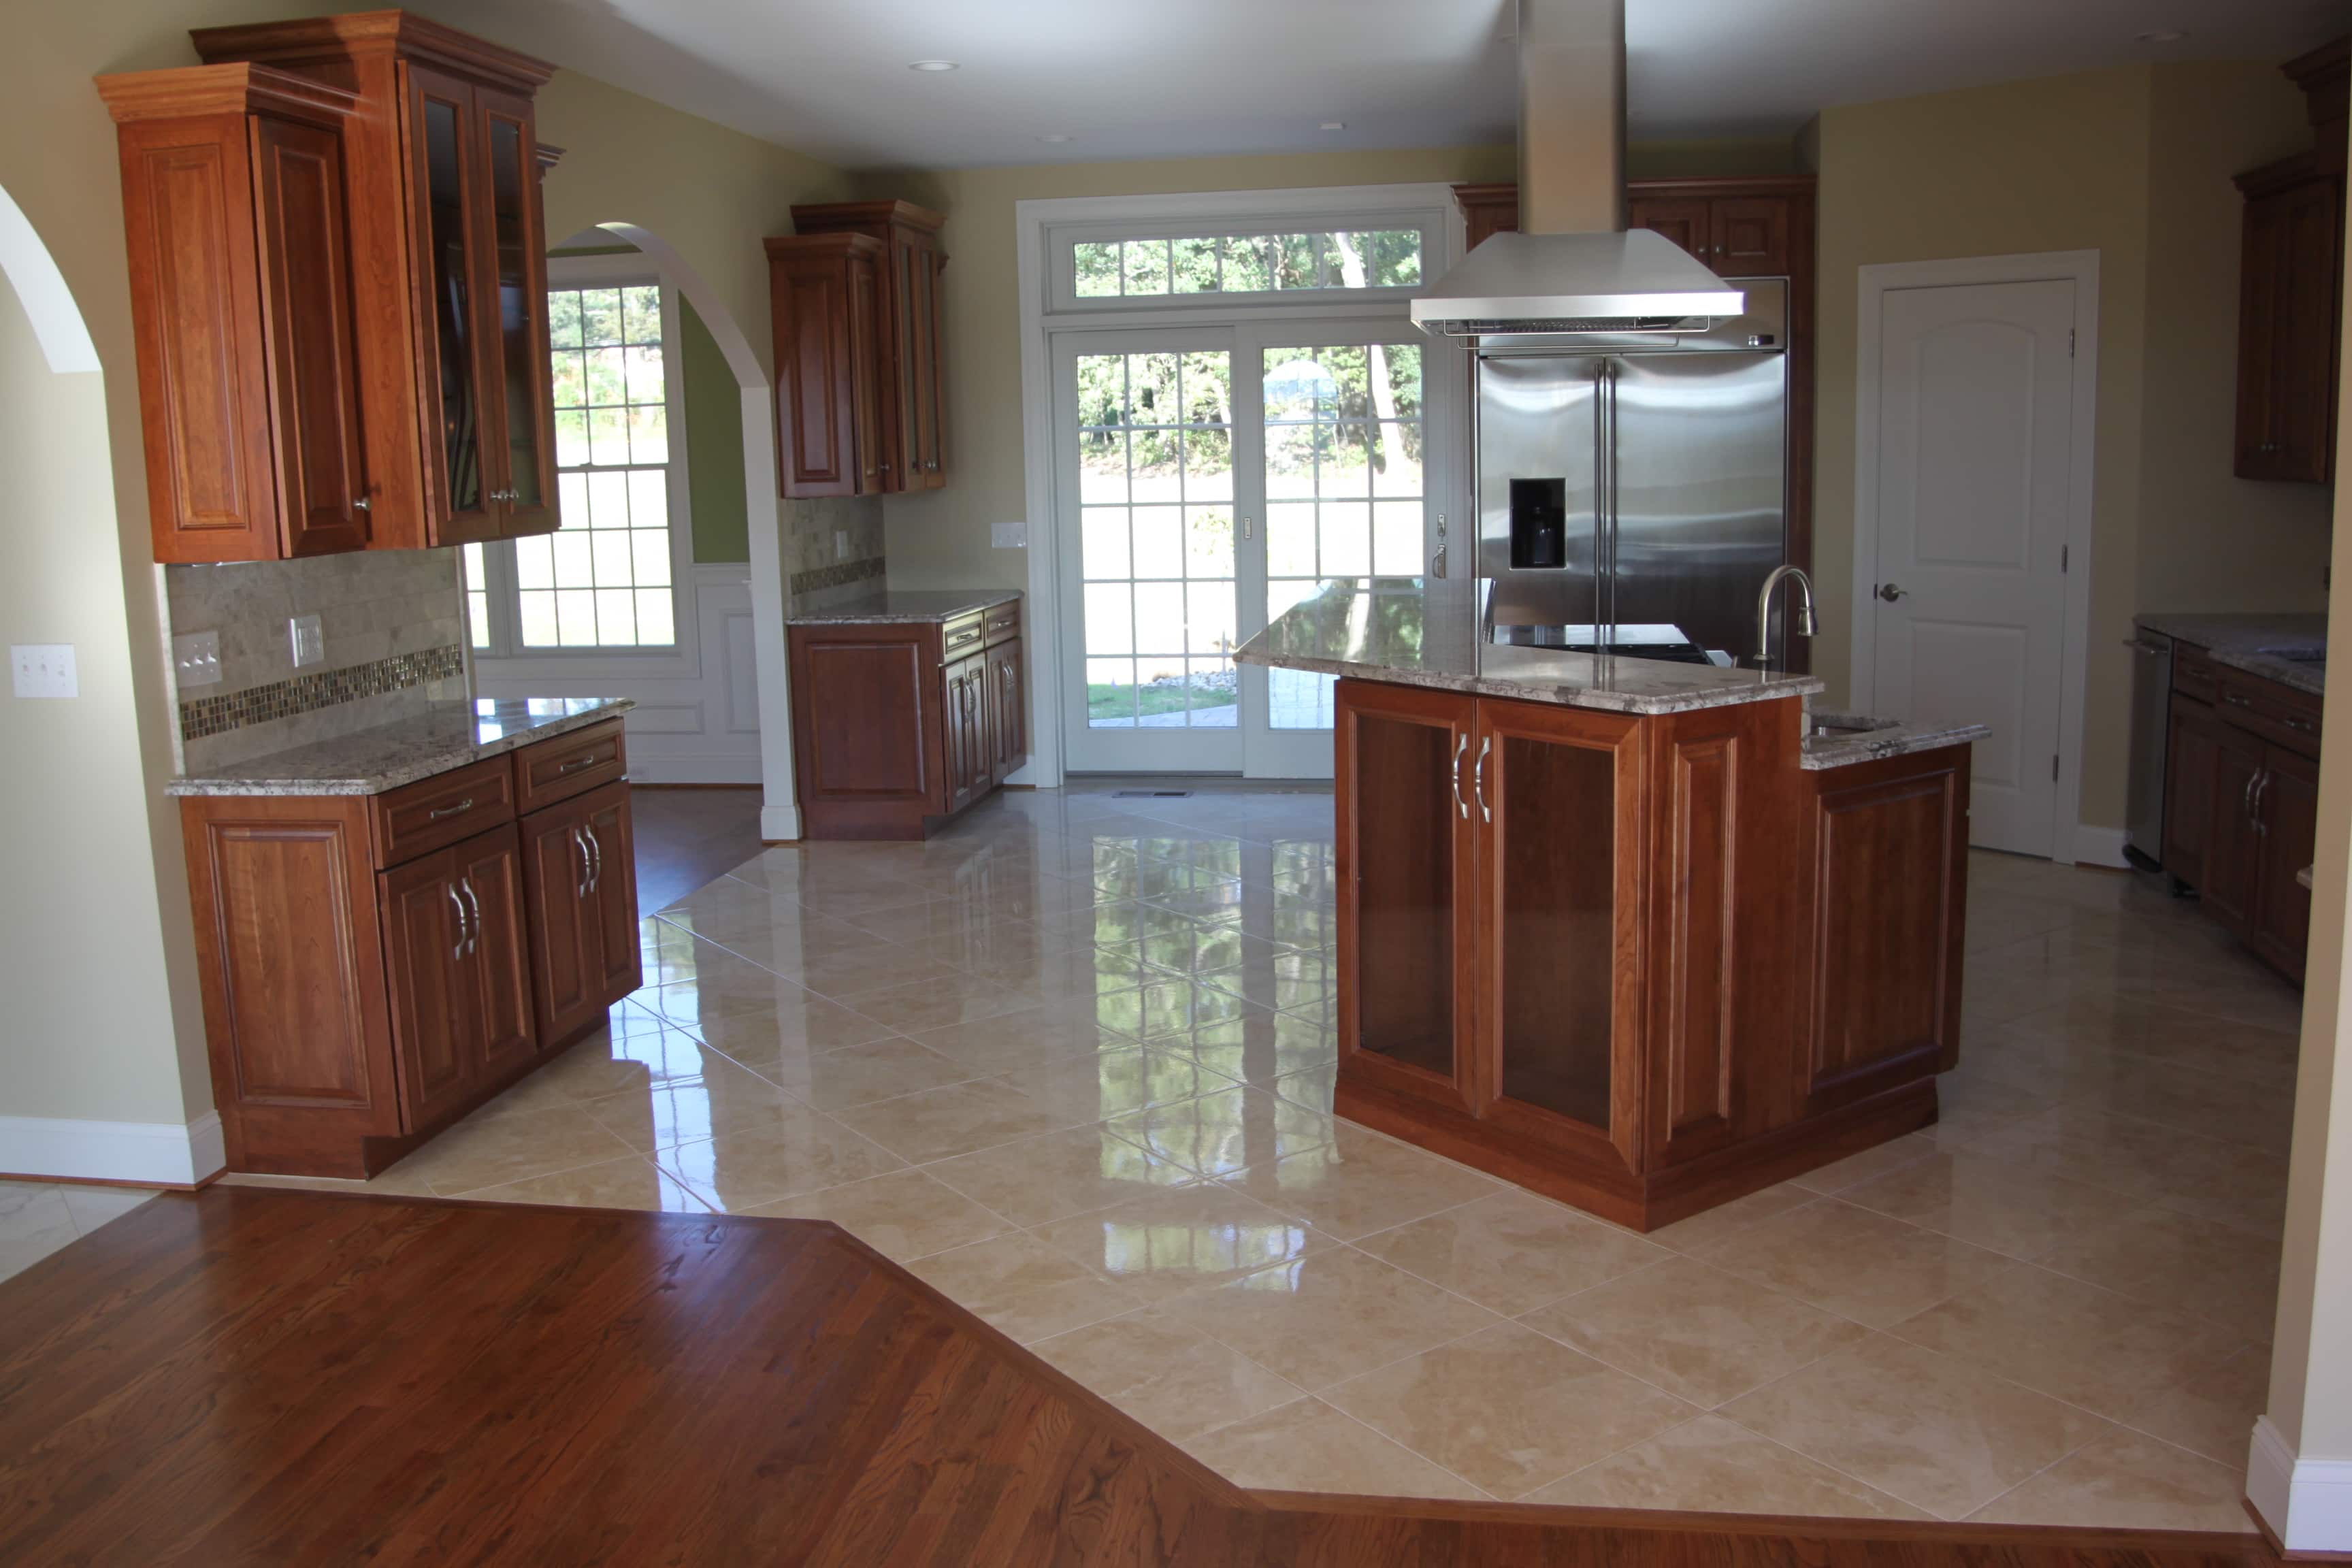 Matching Countertops To Cabinets, How To Match Cabinets Countertops And Flooring